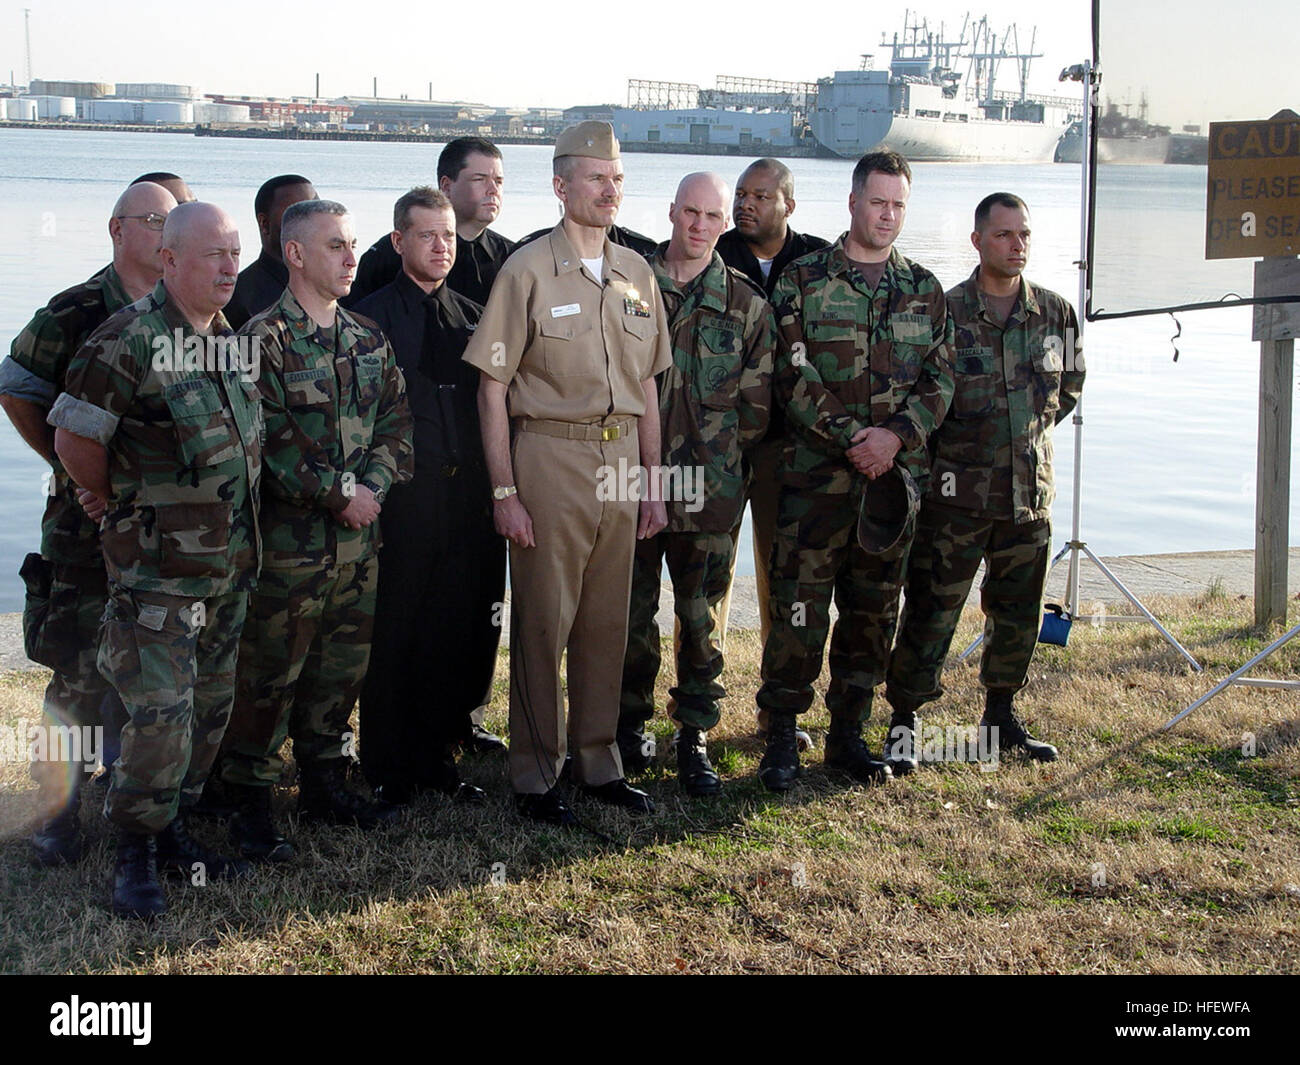 040306-N-0000X-005 Baltimore, Md. (March 6, 2004) Ð Reservists from Naval Reserve Center (NRC) Baltimore assisted in the rescue of more than a dozen passengers from the capsized water-taxi late in the afternoon, March 6 in BaltimoreÕs Inner Habor. Command Master Chief Melvin Johnson and Information Systems Technician 3rd Class Edward Mendez witnessed the water taxi capsize as it attempted to maneuver in heavy winds and seas. They immediately called 911, and Cmdr. Petersen Decker, commanding officer of Fleet and Industrial Supply Center Norfolk, Det. 106, coordinated the launch one of the NRC's Stock Photo